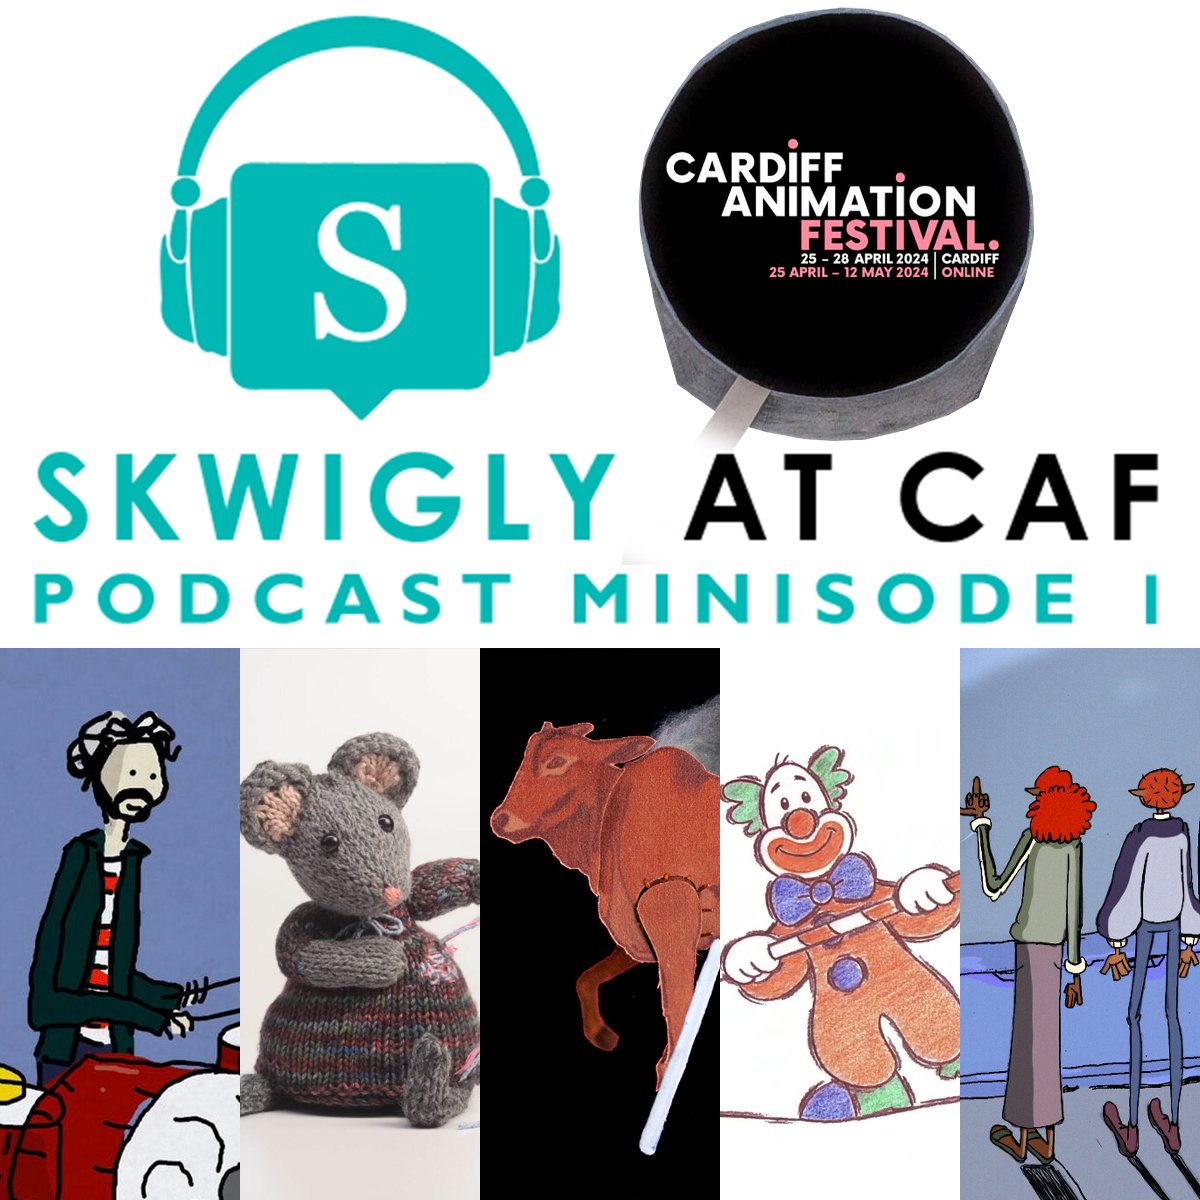 If you missed our Animators Brunch sessions at this year's @CardiffAnimFest, we'll be rolling them out this week on Skwigly as special podcast minisodes! Episode 1 is available now via the Podcasts section of the site